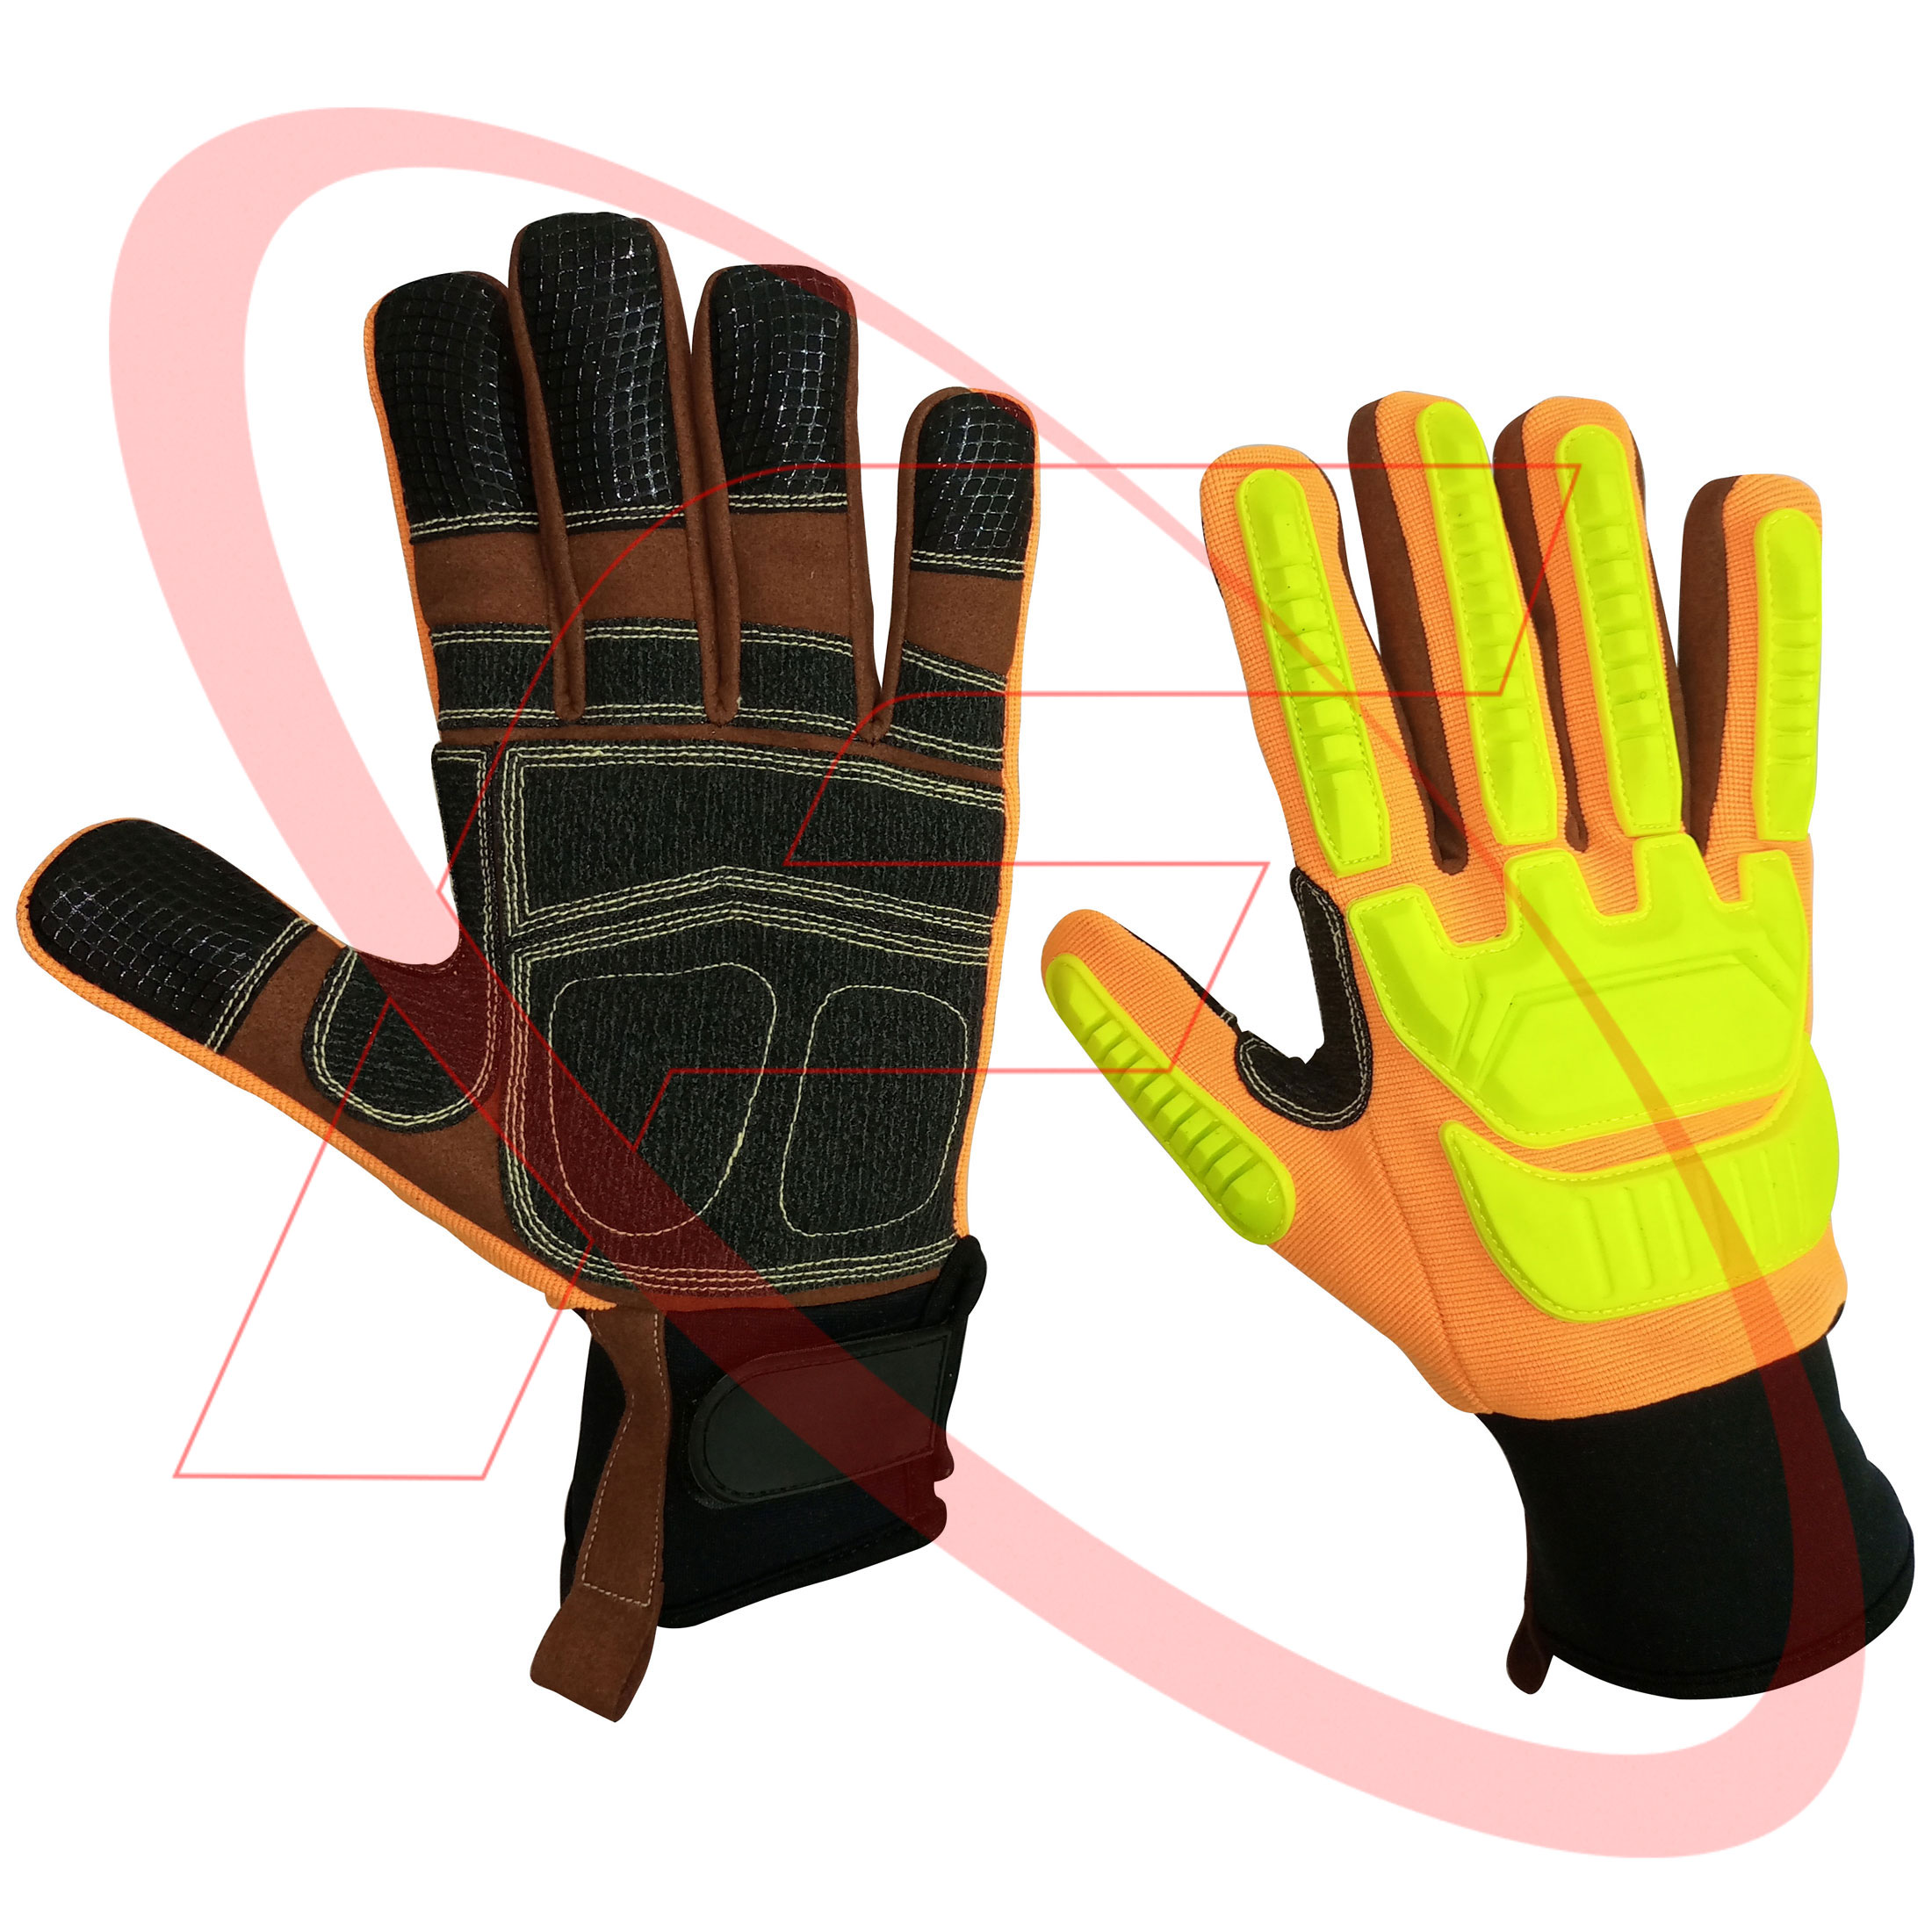 Anti Impact Thermoplastic Rubber Gloves Best Quality Impact Protective Gloves Best Choice Impact Gloves for Hand Safety